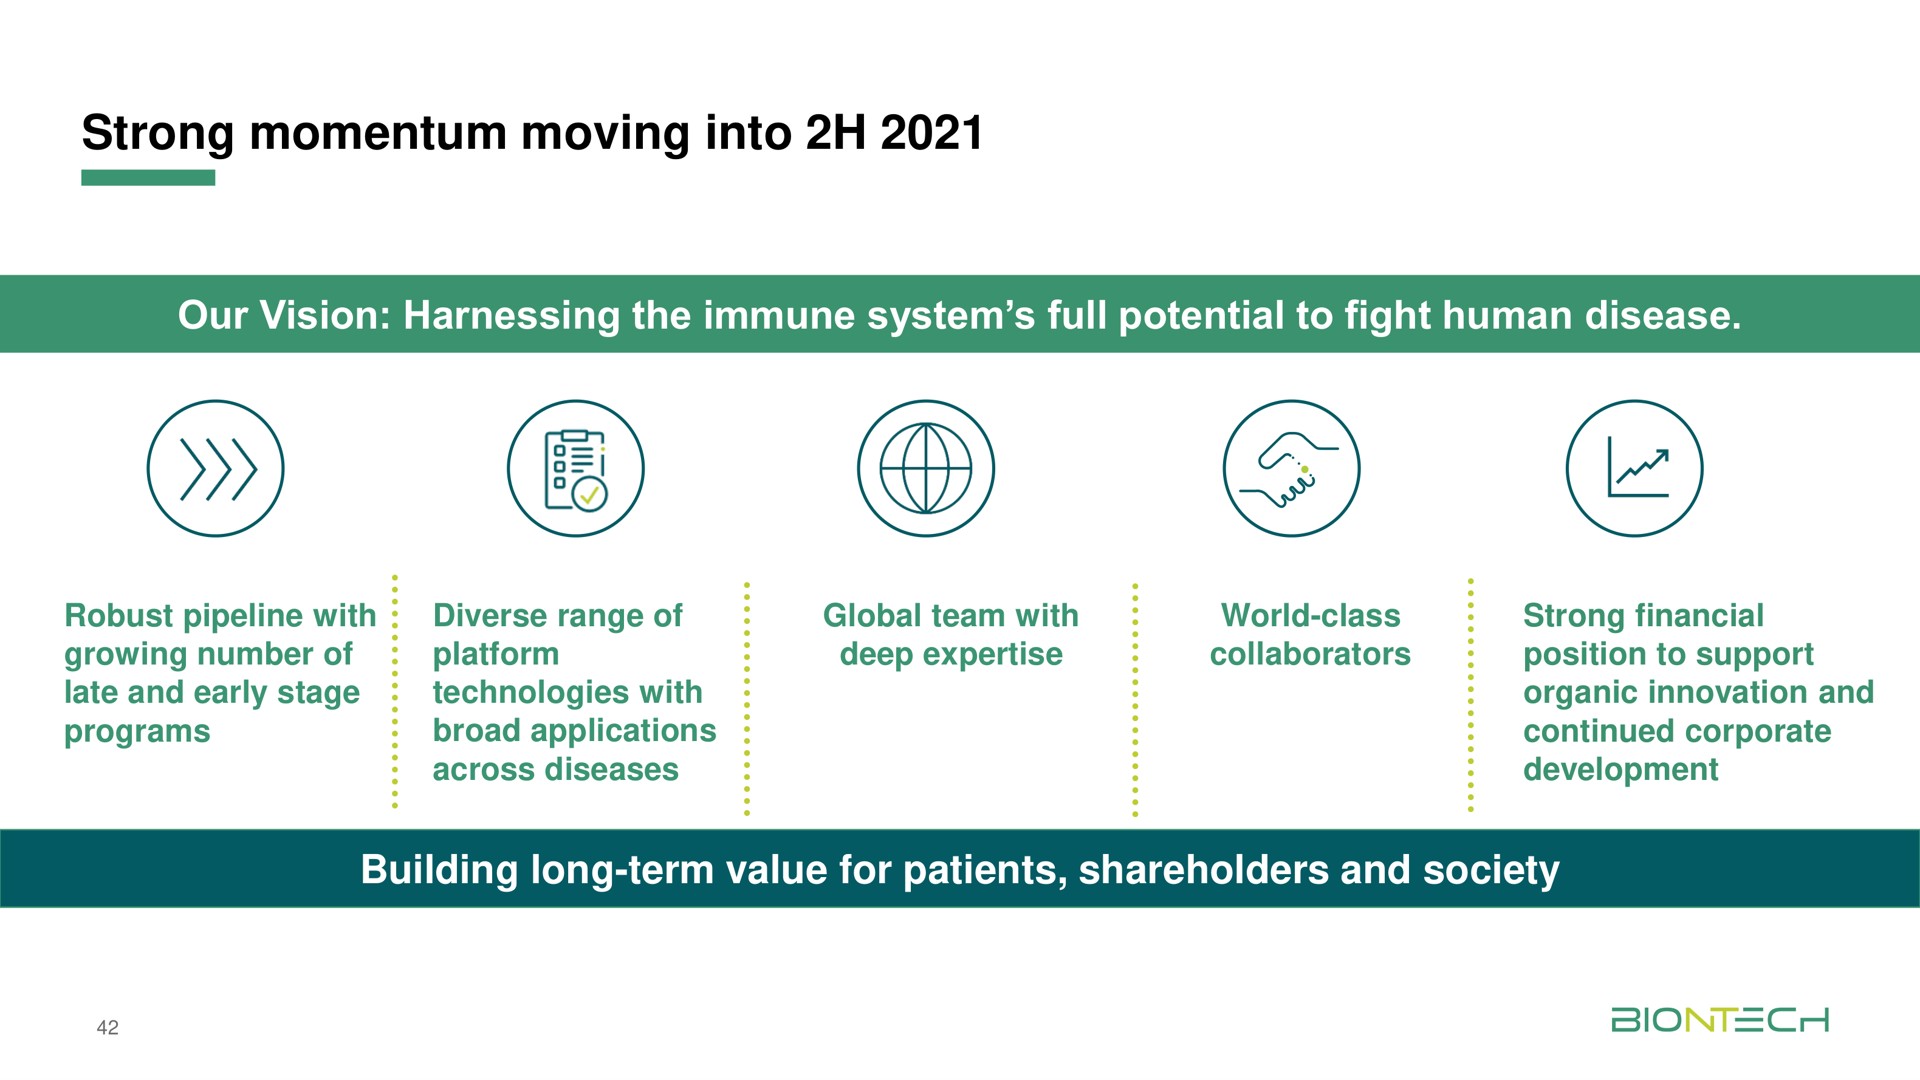 strong momentum moving into our vision harnessing the immune system full potential to fight human disease building long term value for patients shareholders and society | BioNTech